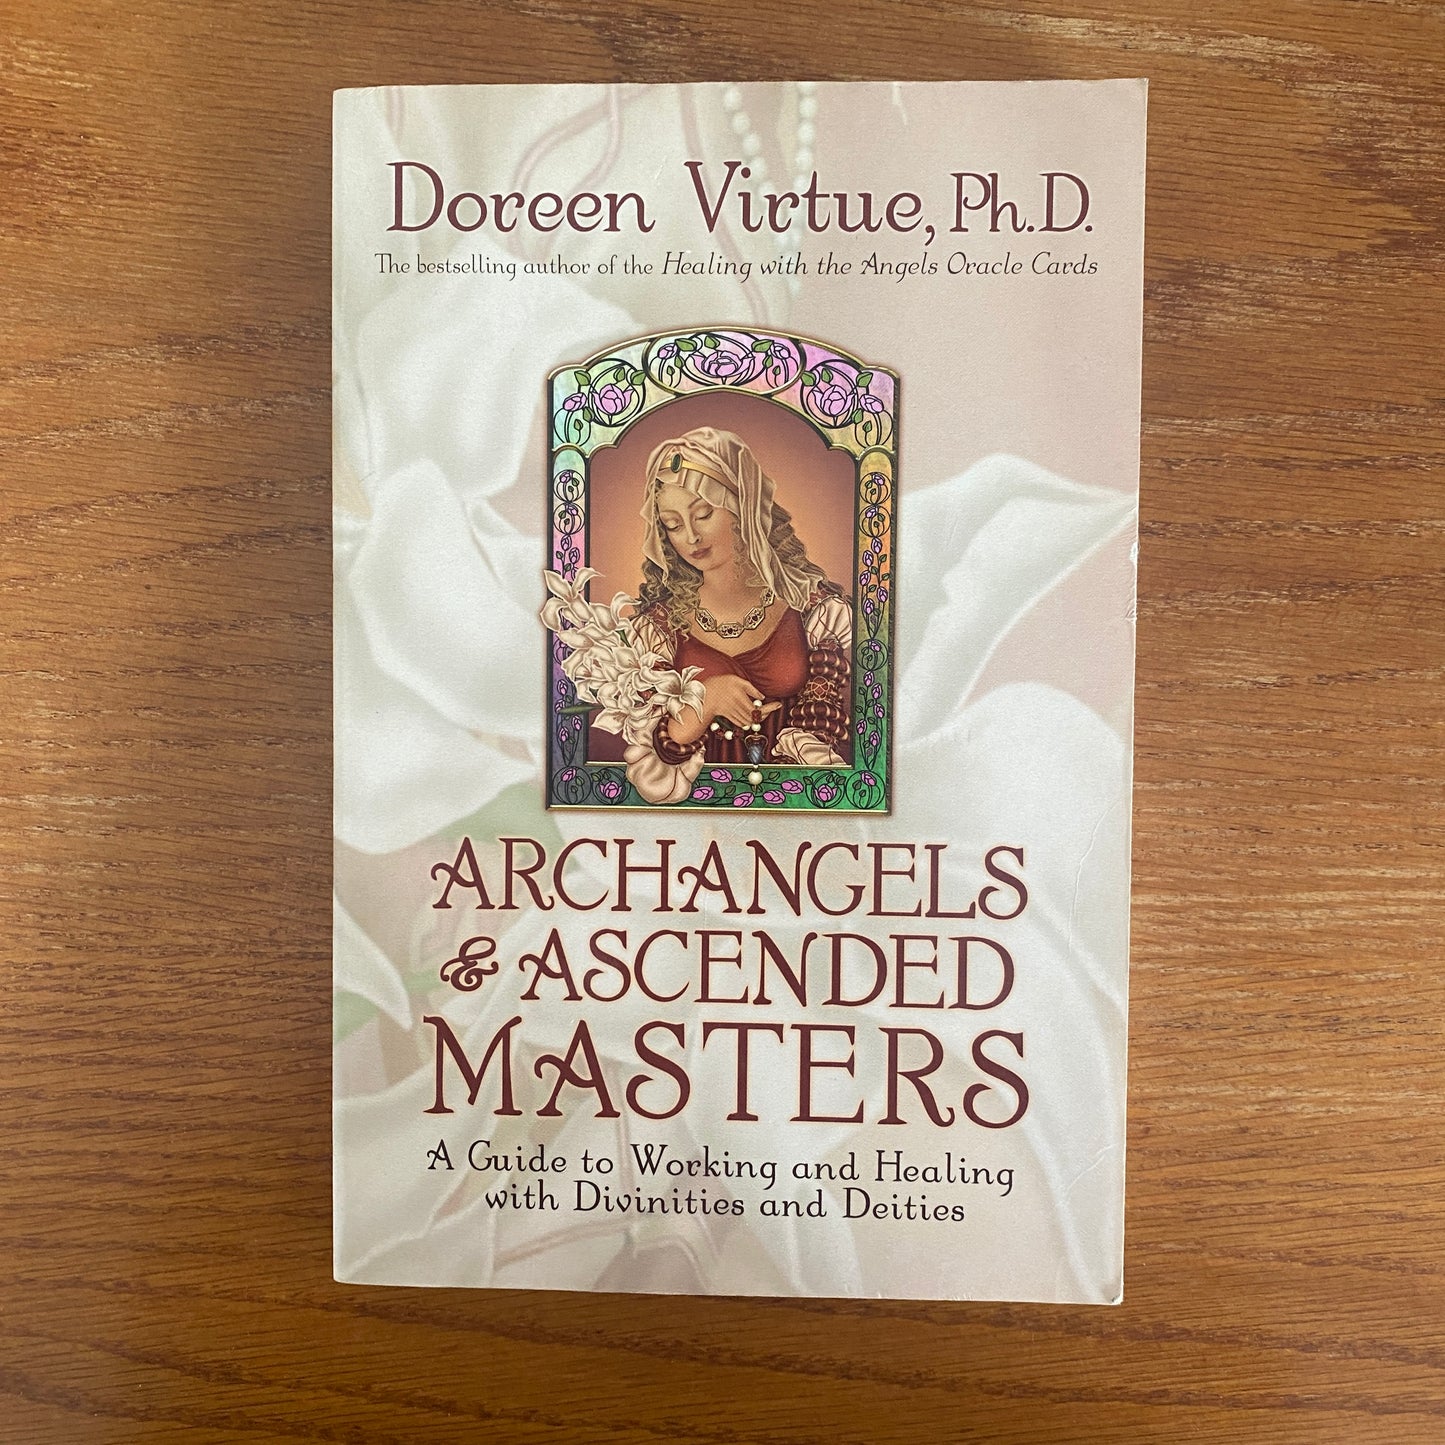 Archangels & Ascended Masters - A Guide to Working and Healing with Divinities and Deities - Doreen Victue, Ph.D